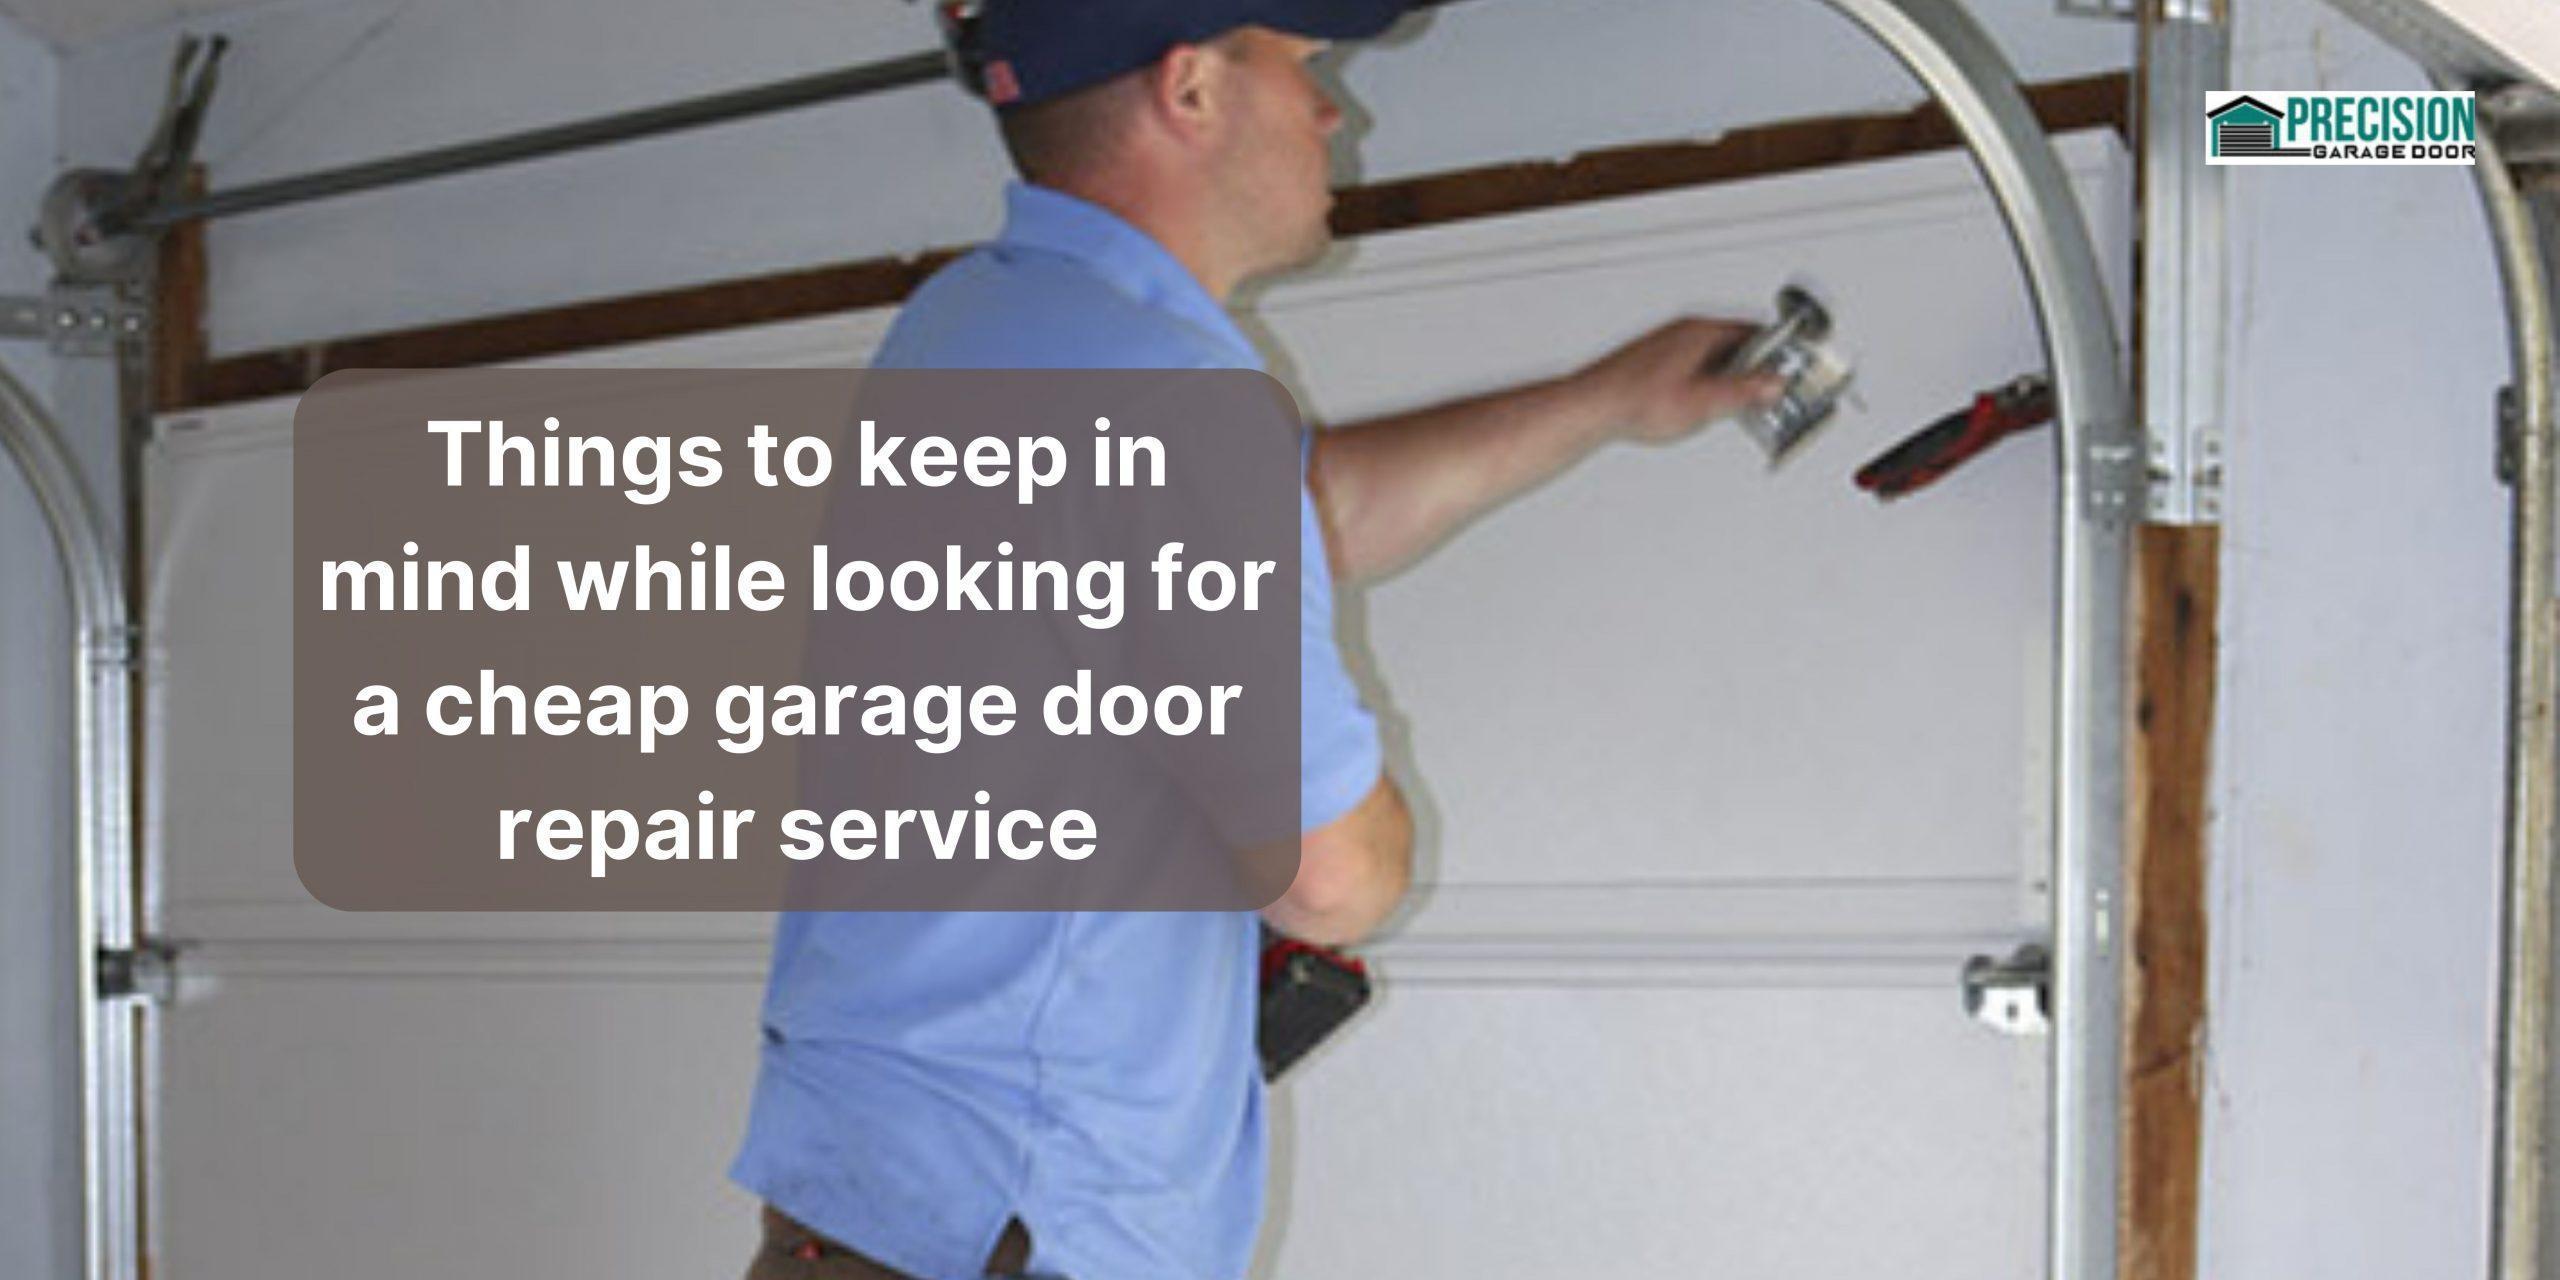 Things to keep in mind while looking for a cheap garage door repair service